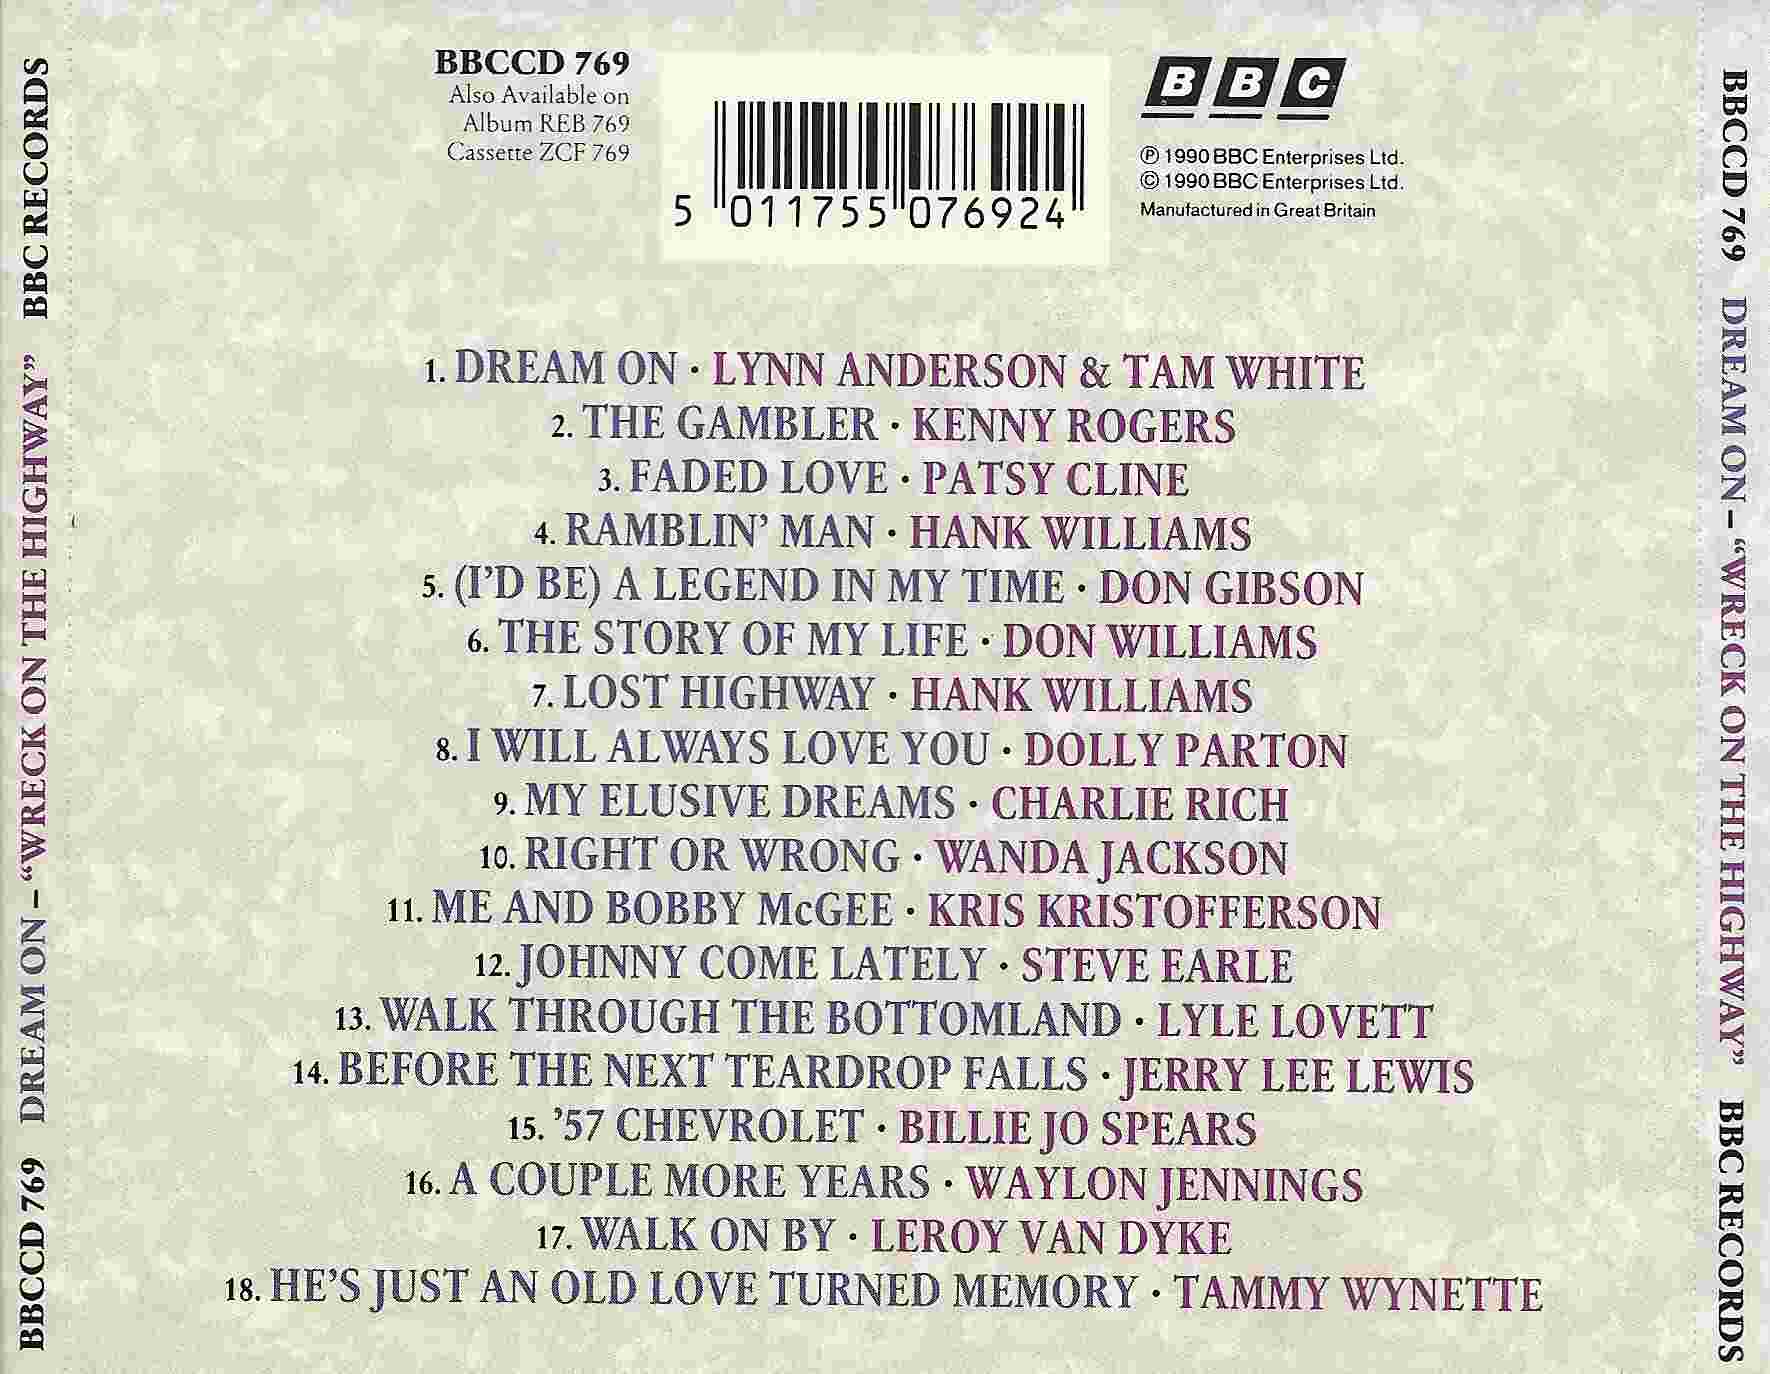 Picture of BBCCD769 Dream on by artist Various from the BBC records and Tapes library